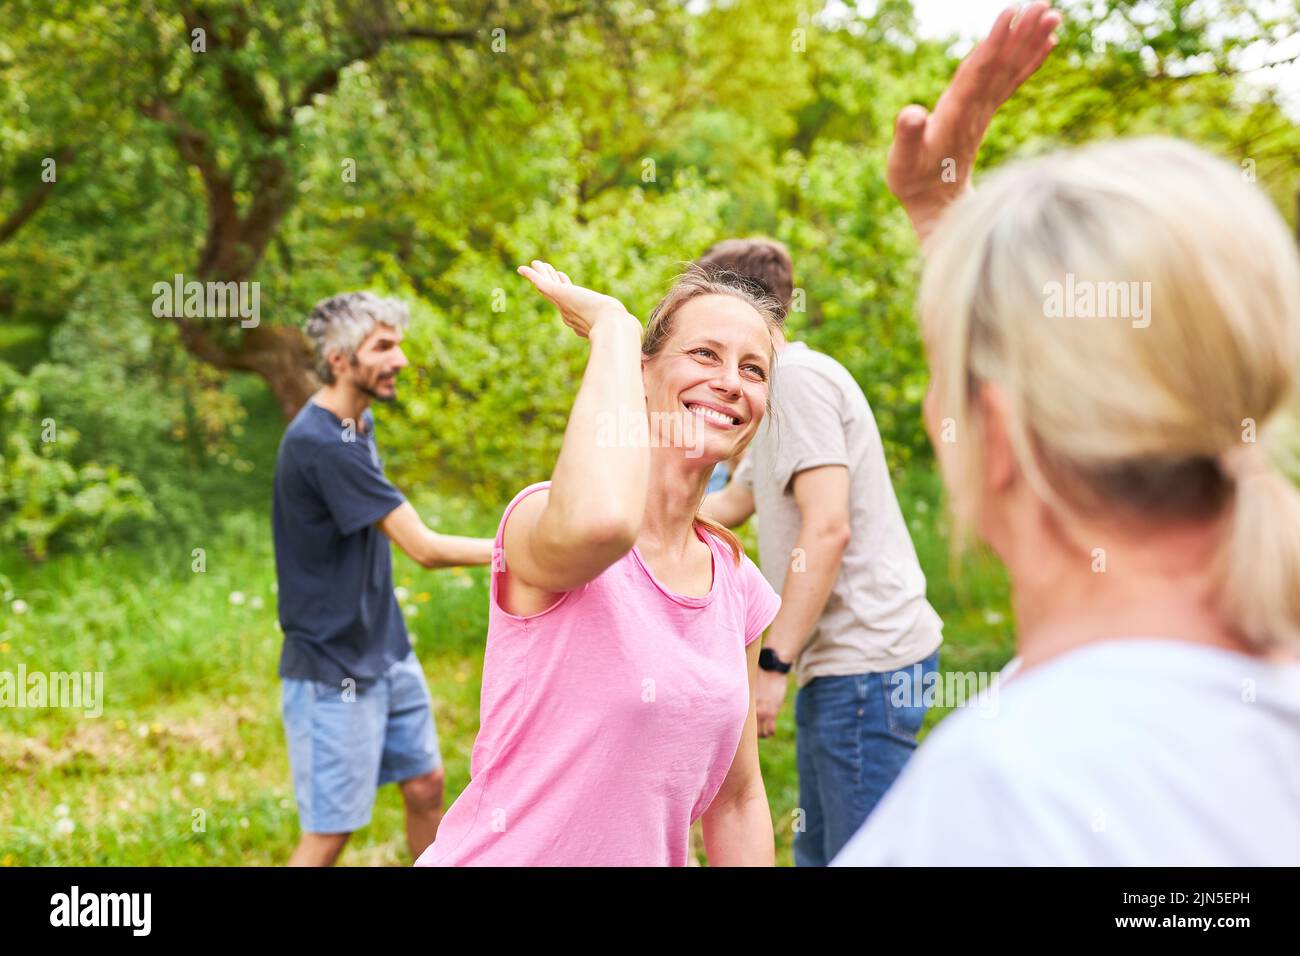 Young people celebrate success in competition by giving high fives or cheering each other on Stock Photo